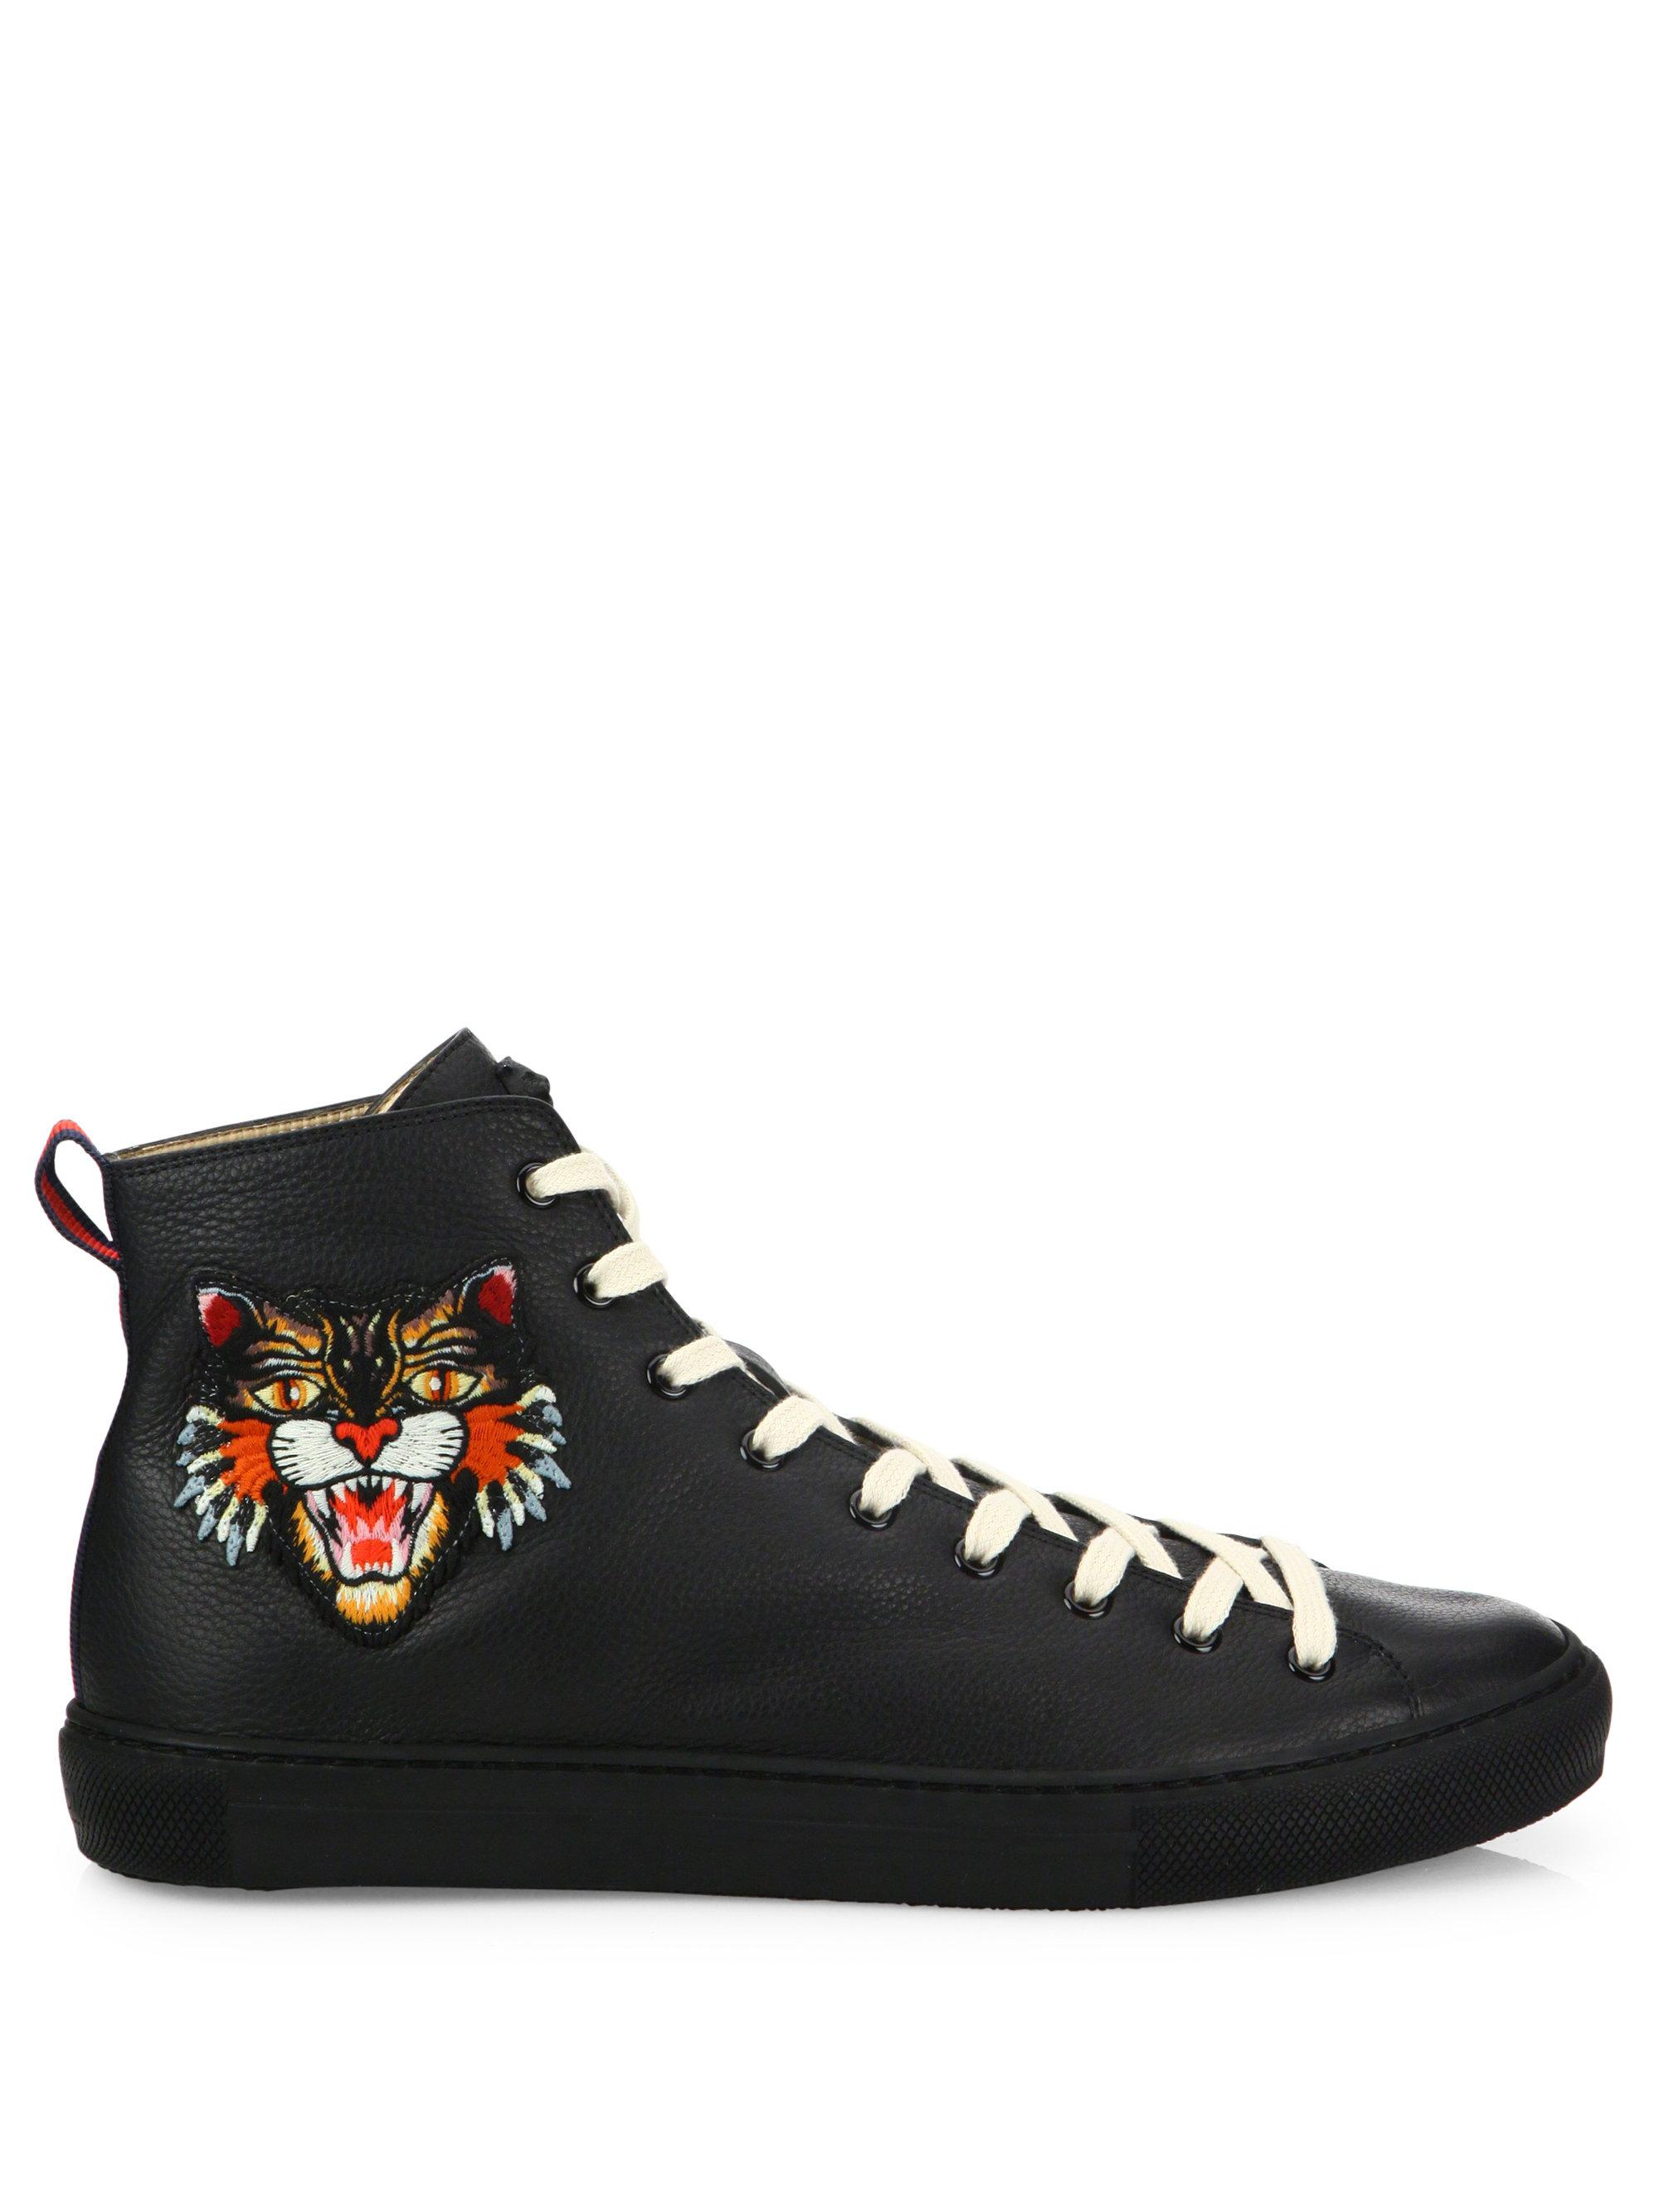 Lyst - Gucci Major Tiger Ufo Embroidered Leather High-top Sneakers in Black